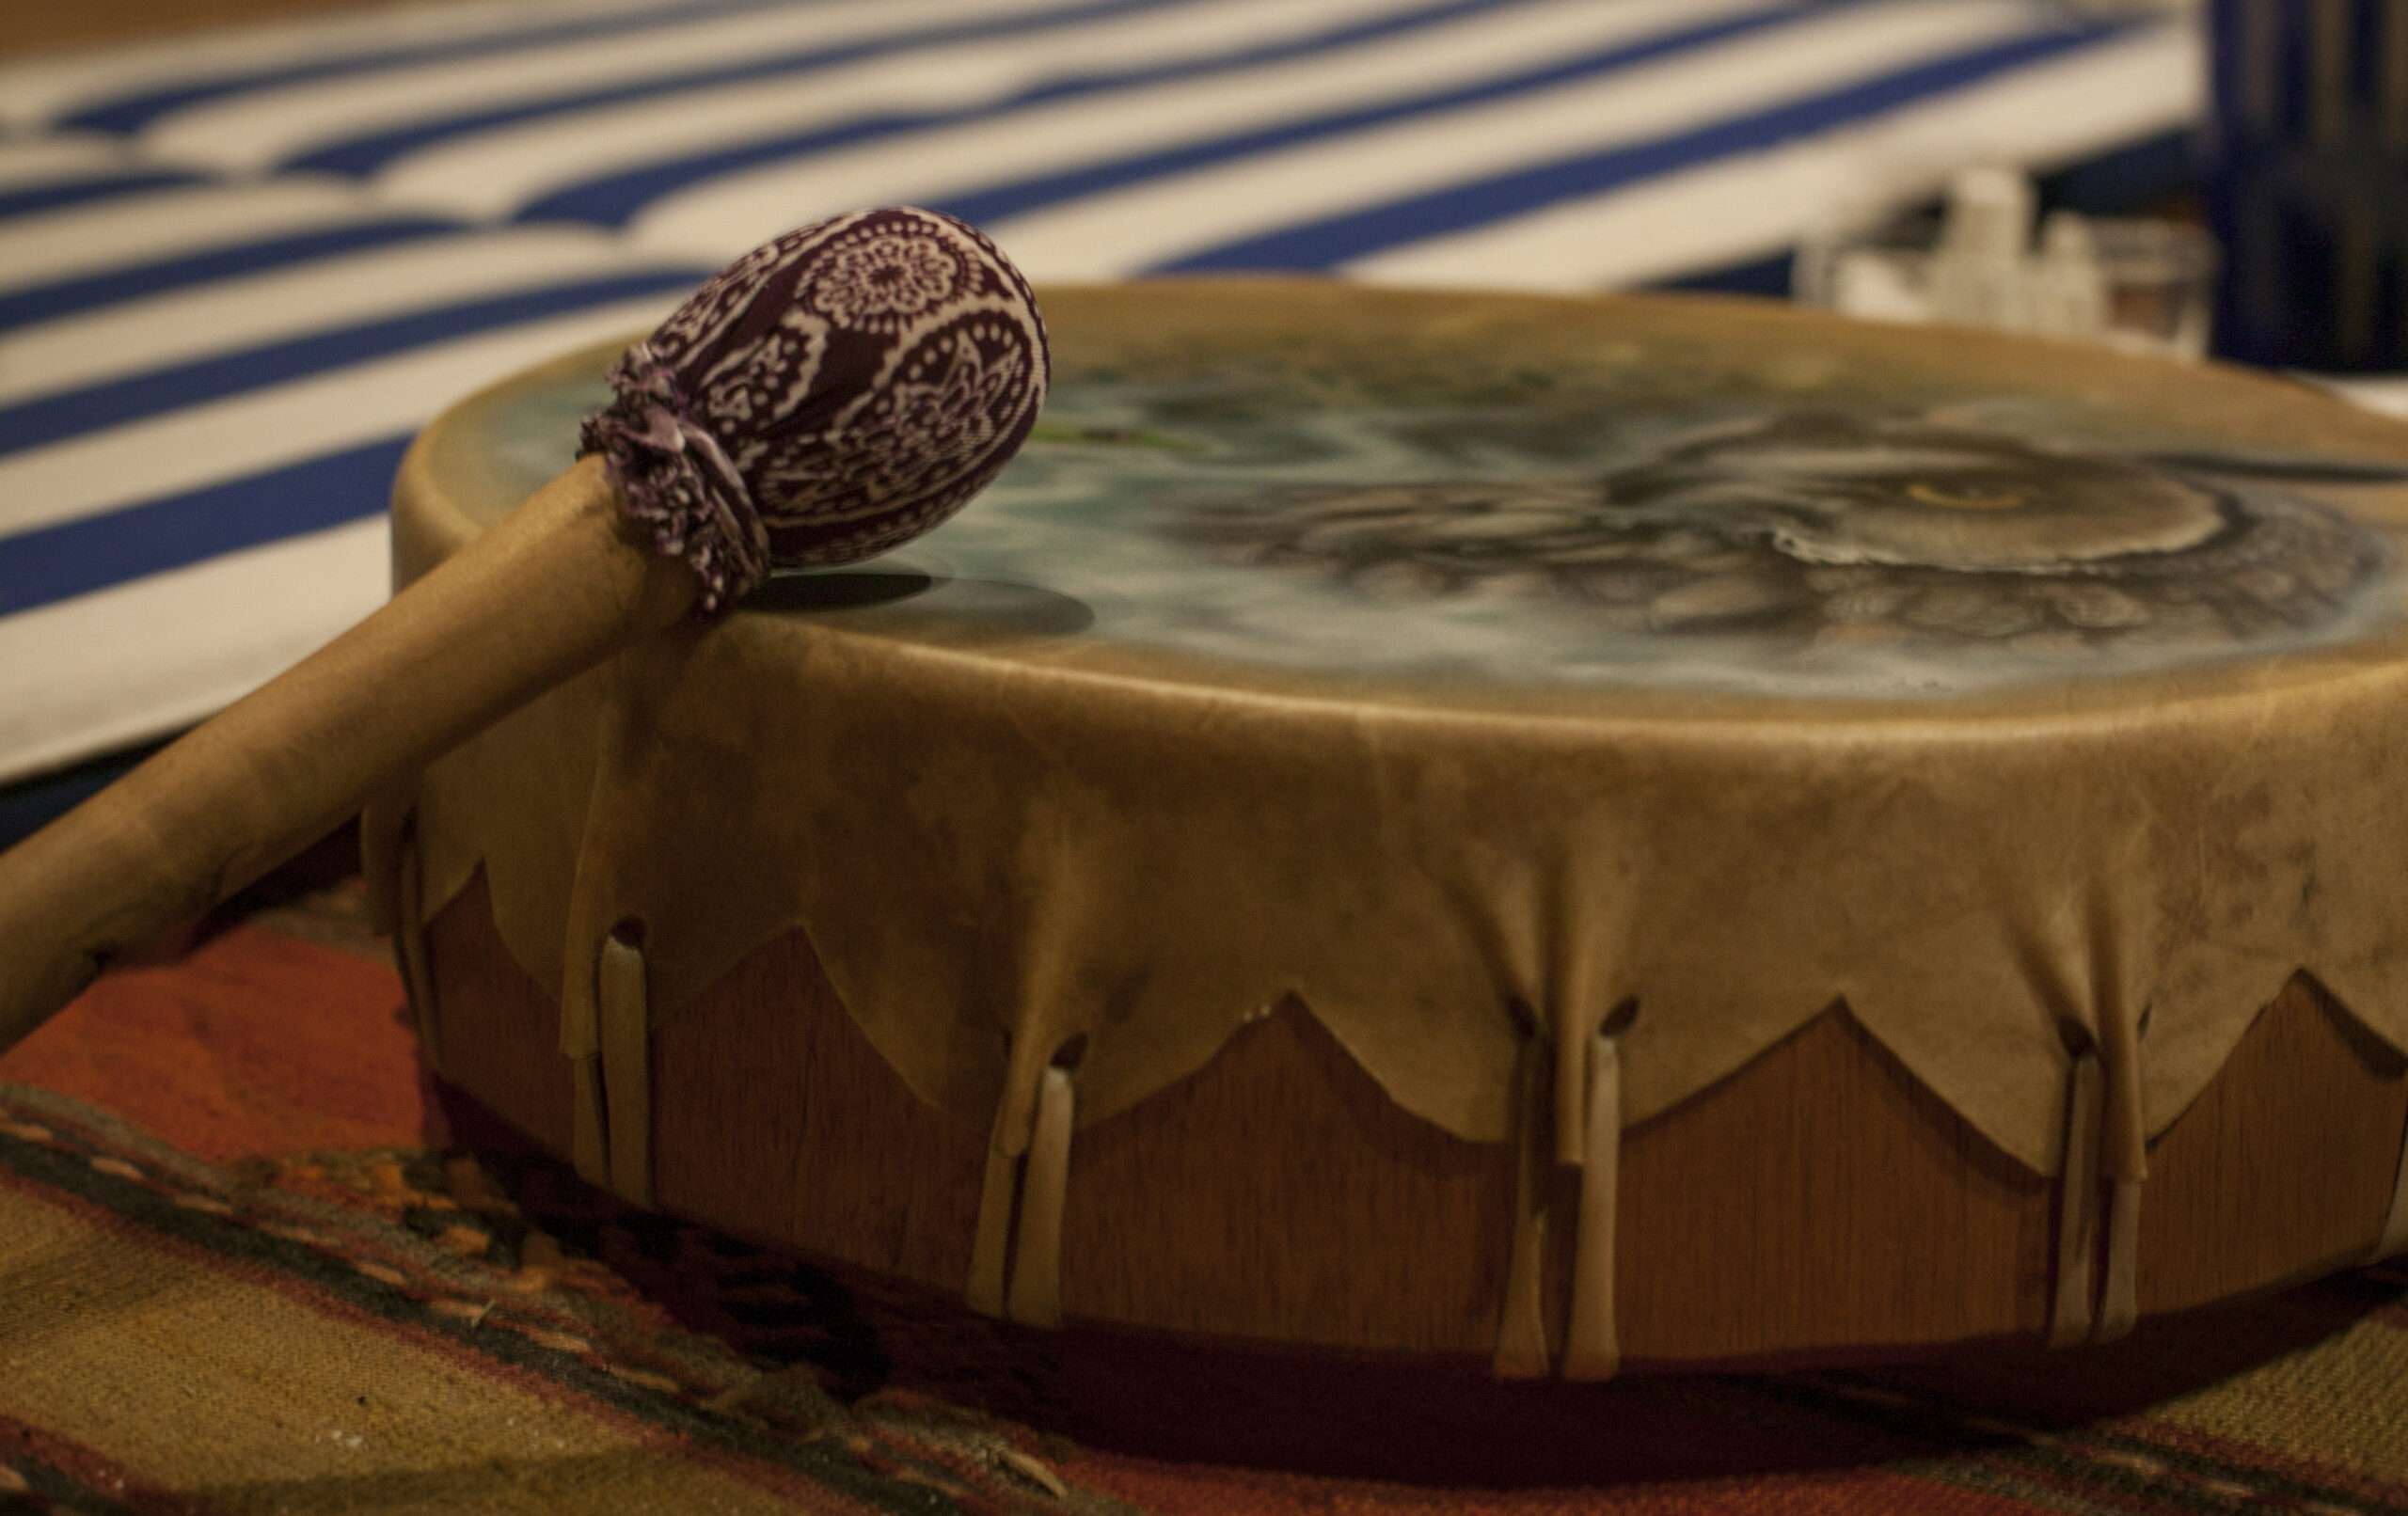 JOB POSTING FOR: Drumming Facilitator shamanic drum used special ceremonies such as ceremony with use ayahuasca scaled Home shamanic drum used special ceremonies such as ceremony with use ayahuasca scaled